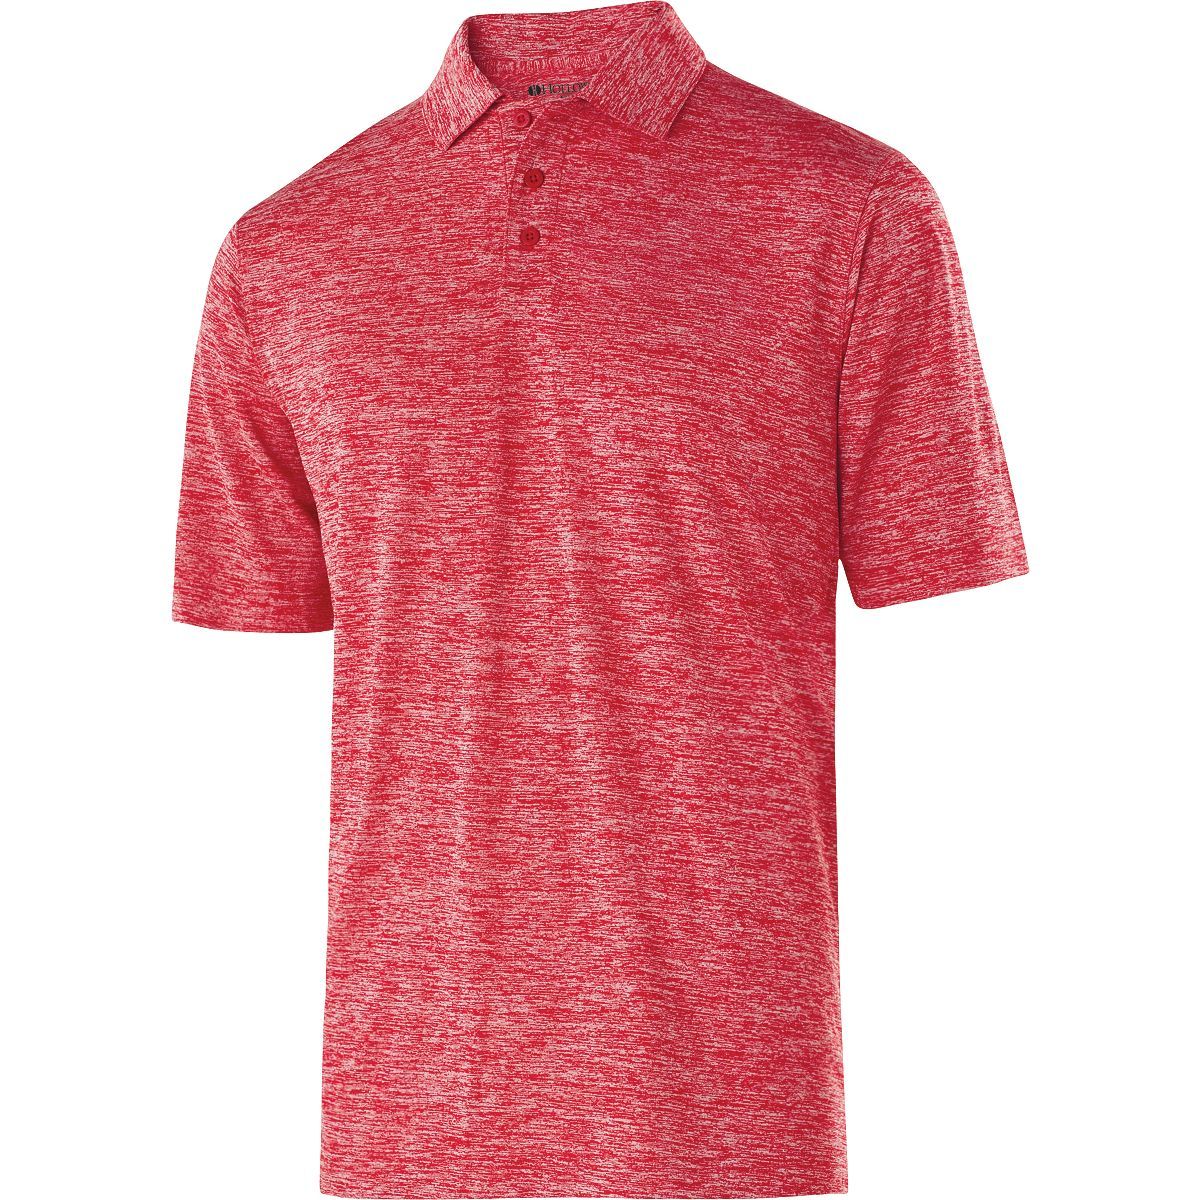 Holloway Electrify 2.0 Polo in Scarlet Heather  -Part of the Adult, Adult-Polos, Polos, Holloway, Shirts product lines at KanaleyCreations.com